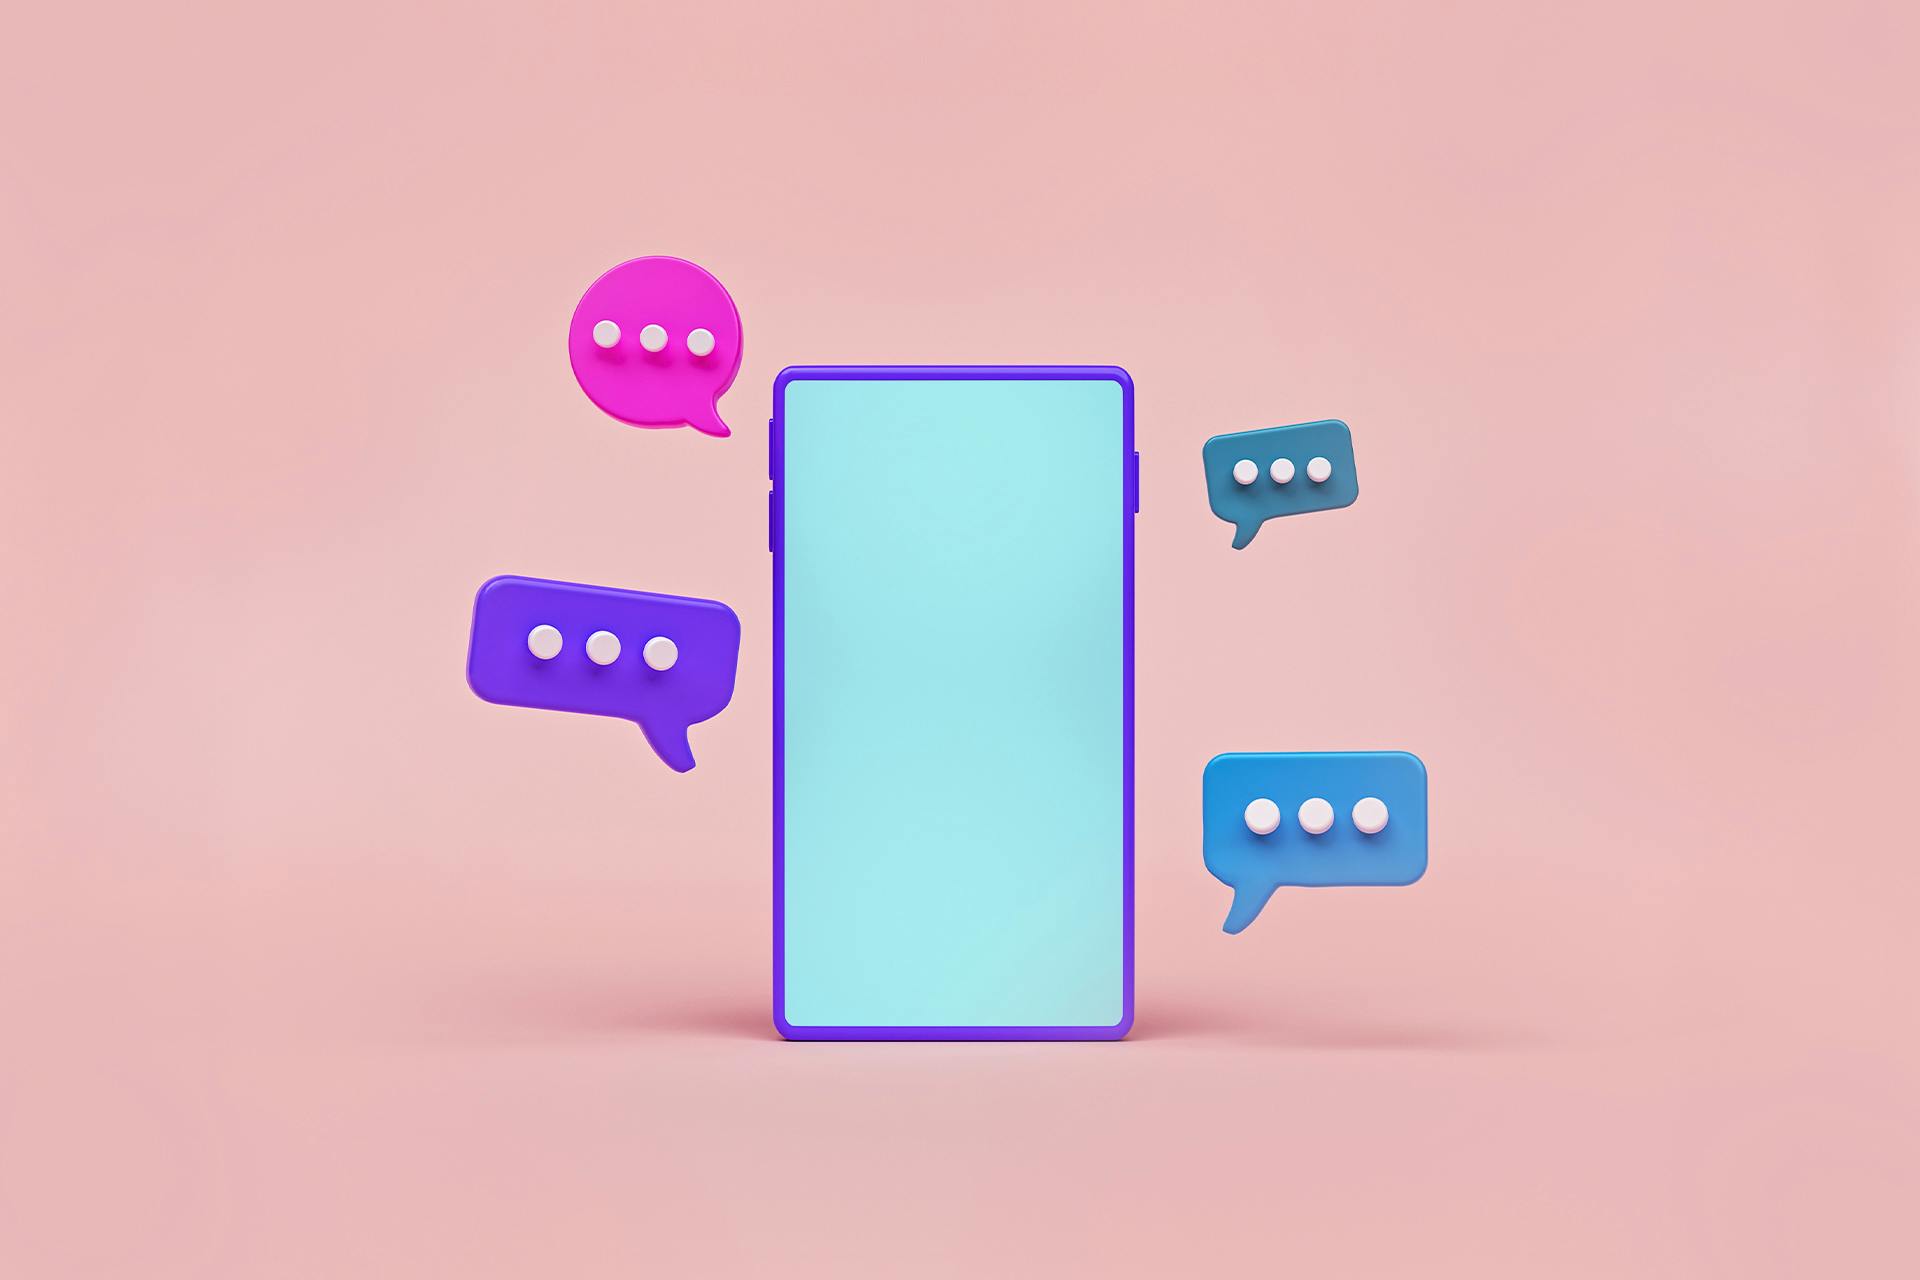 An image of a cartoon phone with stylized chat bubbles appearing around the screen against a solid pink background. Each of the four chat bubbles are a different color, symbolizing the different threads that marketers can engage in on Reddit.